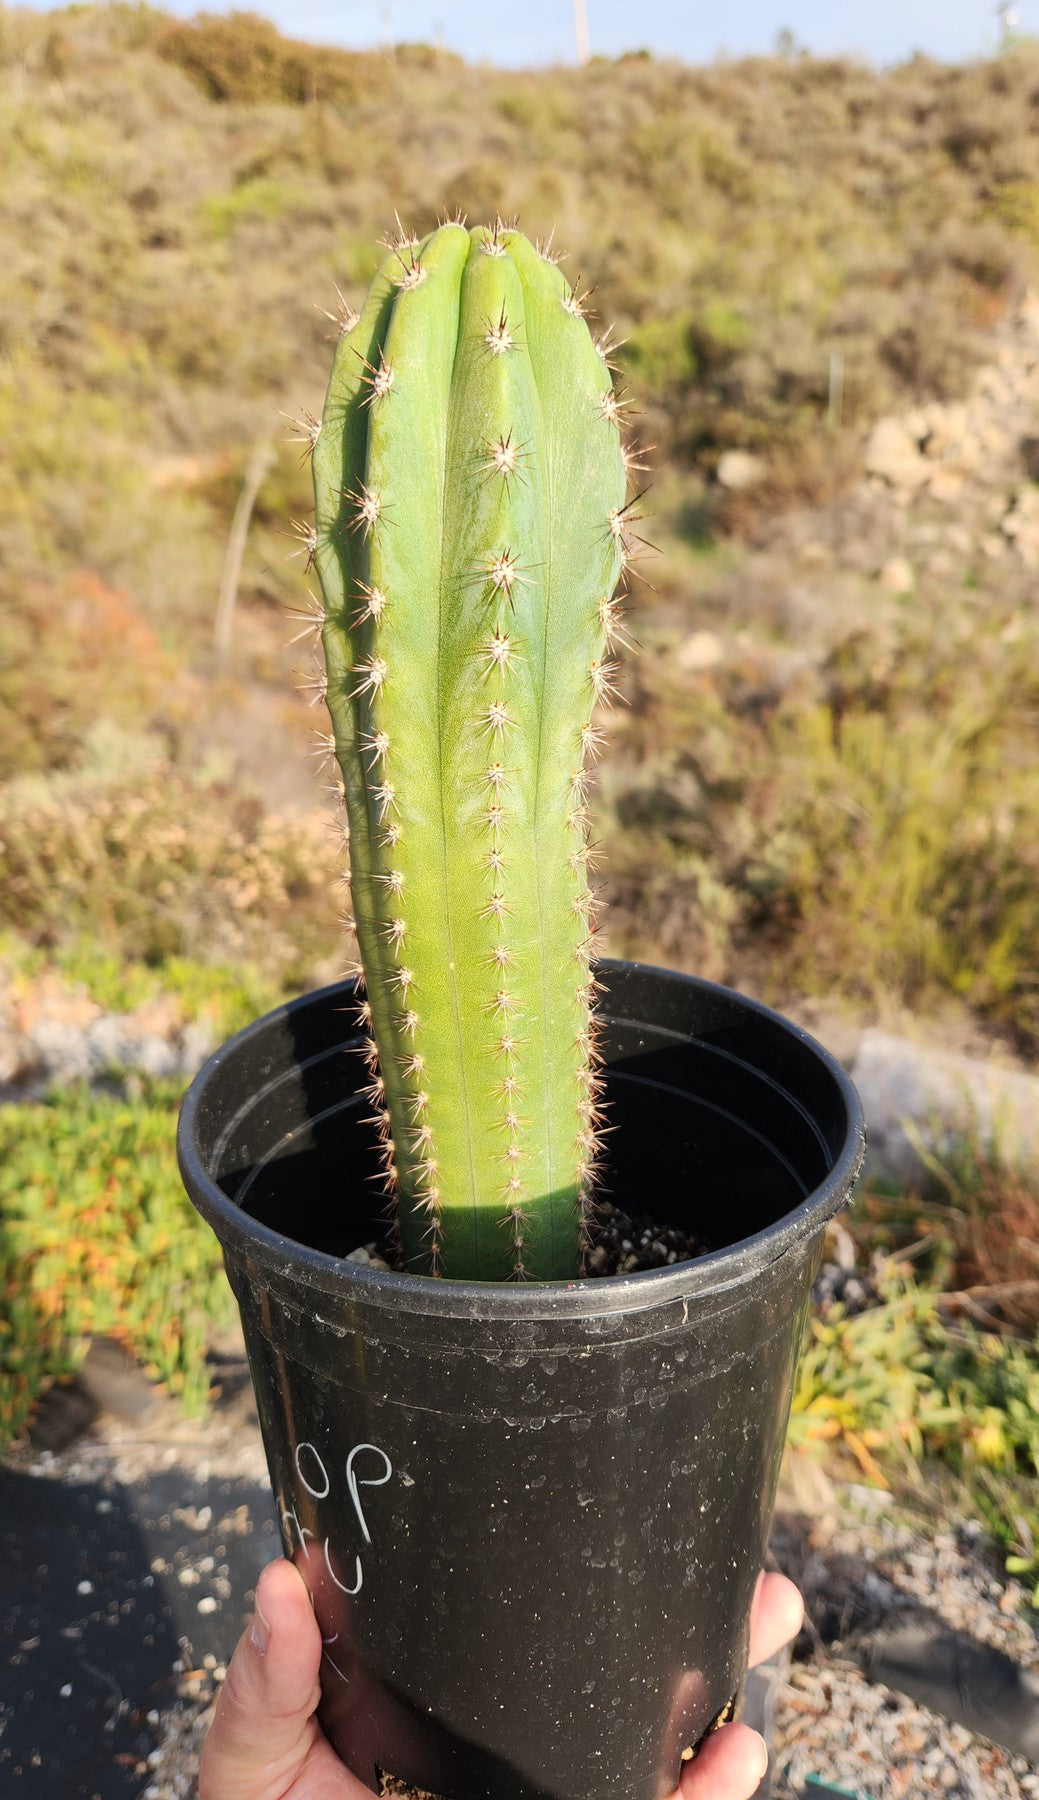 #EC230 EXACT Trichocereus Pachanoi OP from Peru Cactus potted in 2" Container-Cactus - Large - Exact-The Succulent Source